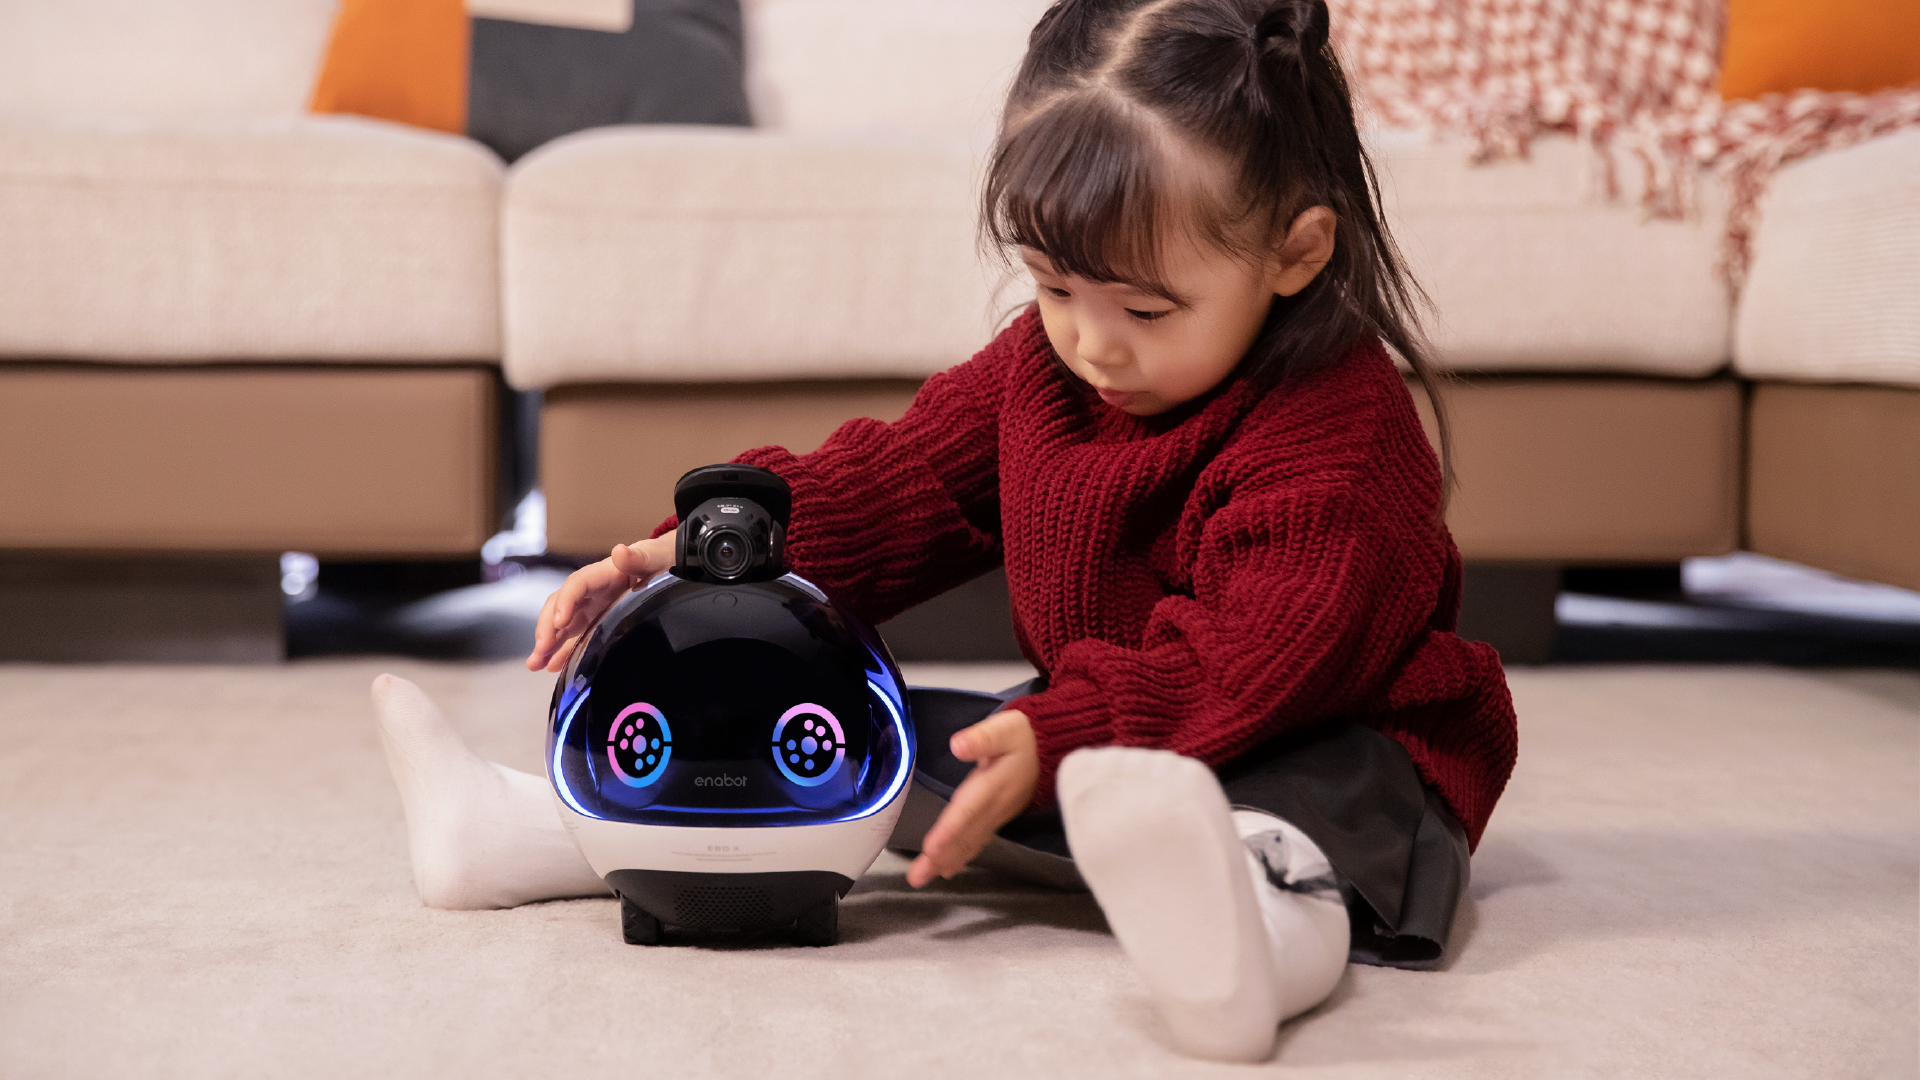 Enabot's Roving Camera Robot is like Your Personal BB8